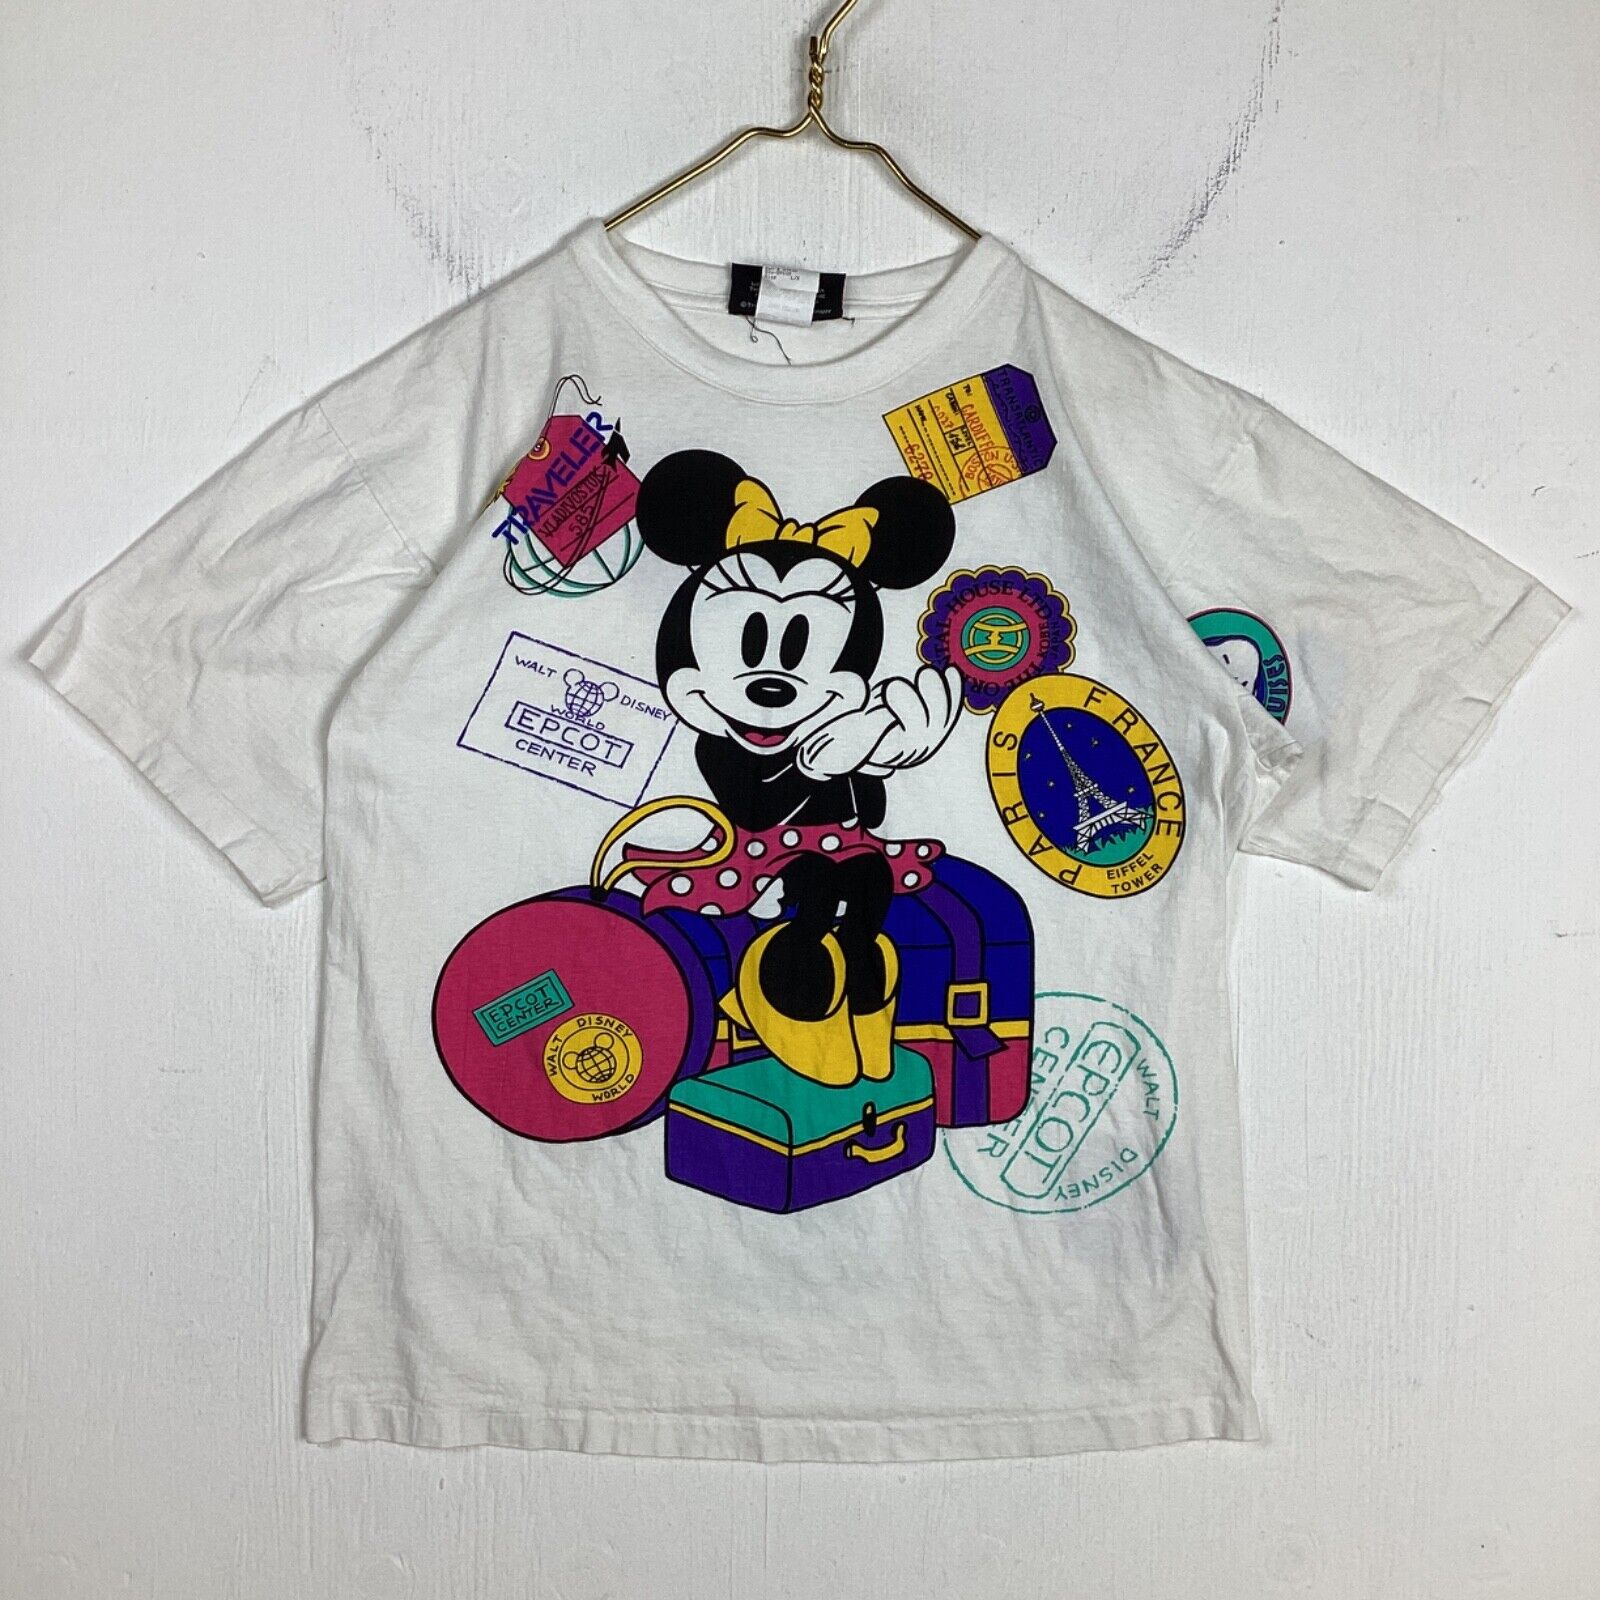 Vintage Minnie Mouse Disney T-Shirt Large Cartoon Single Stitch Made In Usa 90s